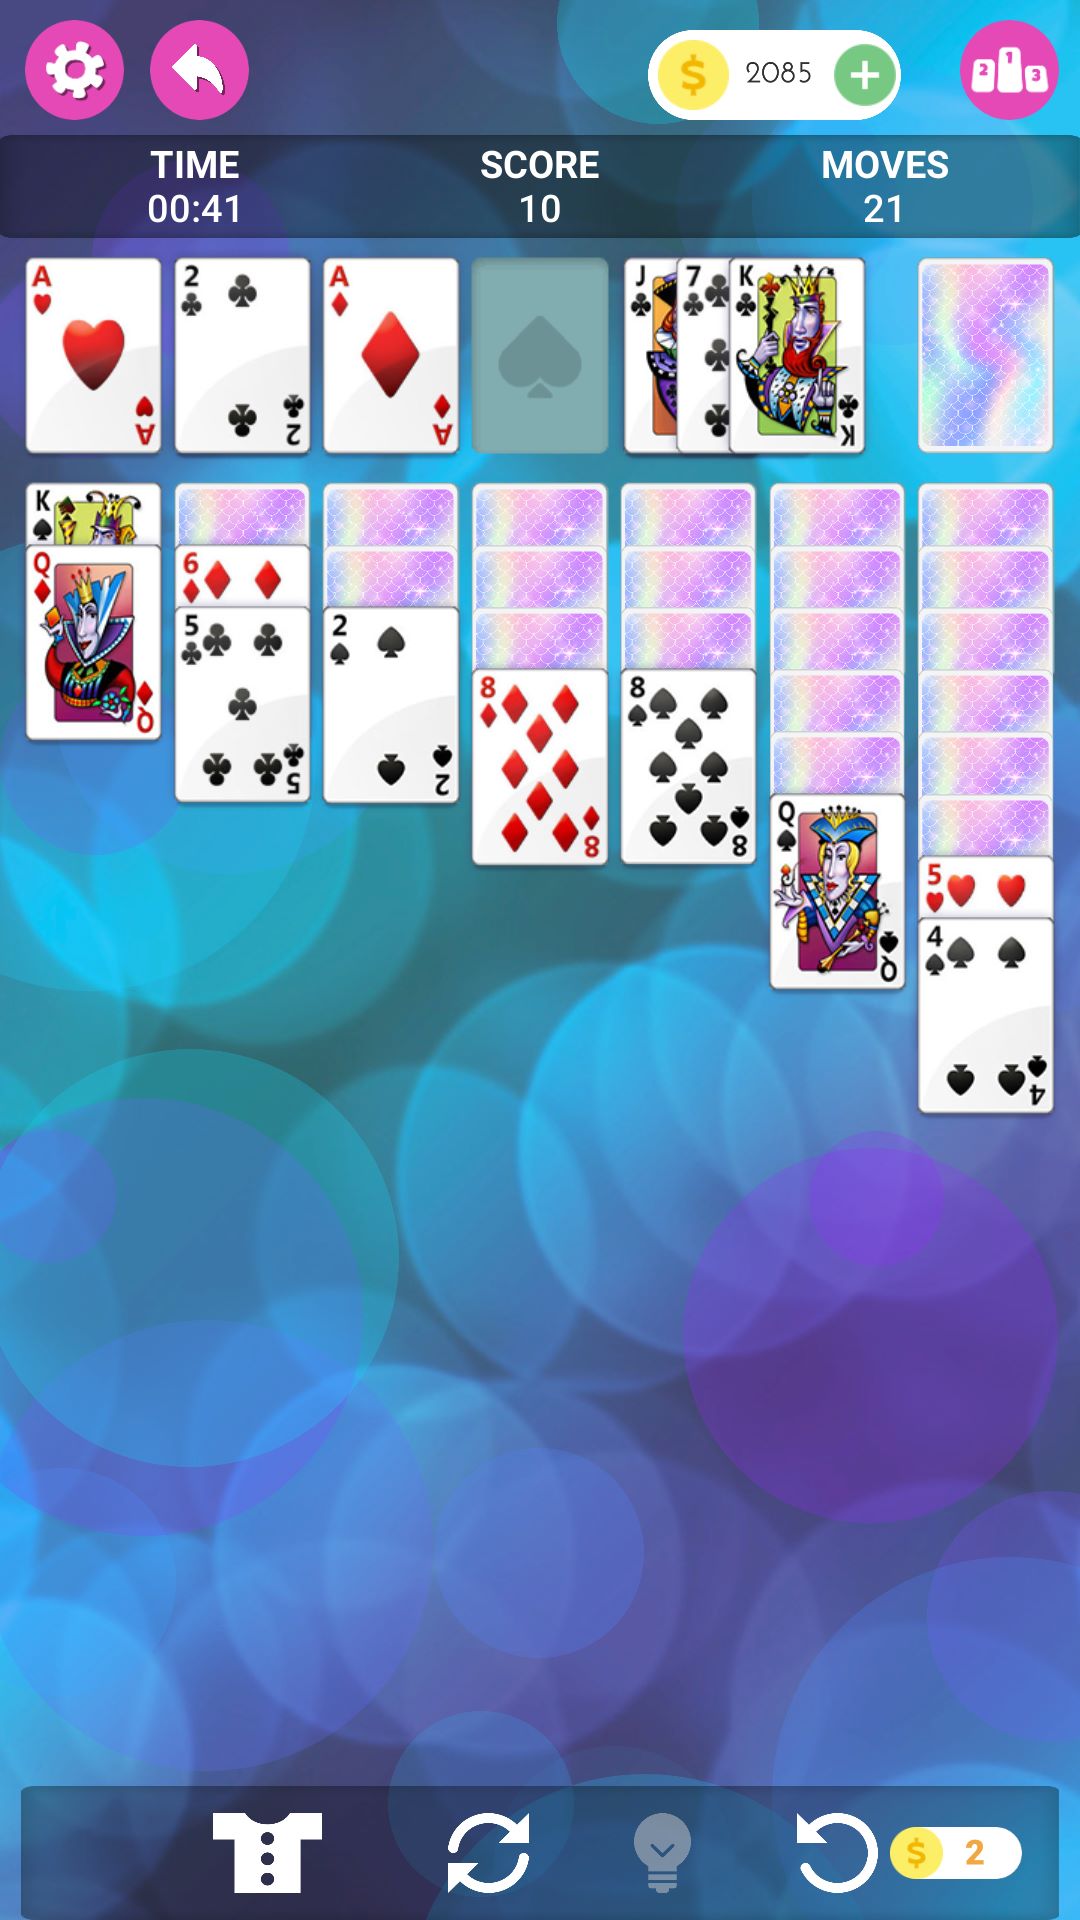 Solitaire 2022 - Free Solitaire Games, Solitaire Games For Kindle Fire  Free, Solitaire Games Free, Play This Cool Classic Solitaire Card Games  Online or Offline For Fun::Appstore for Android